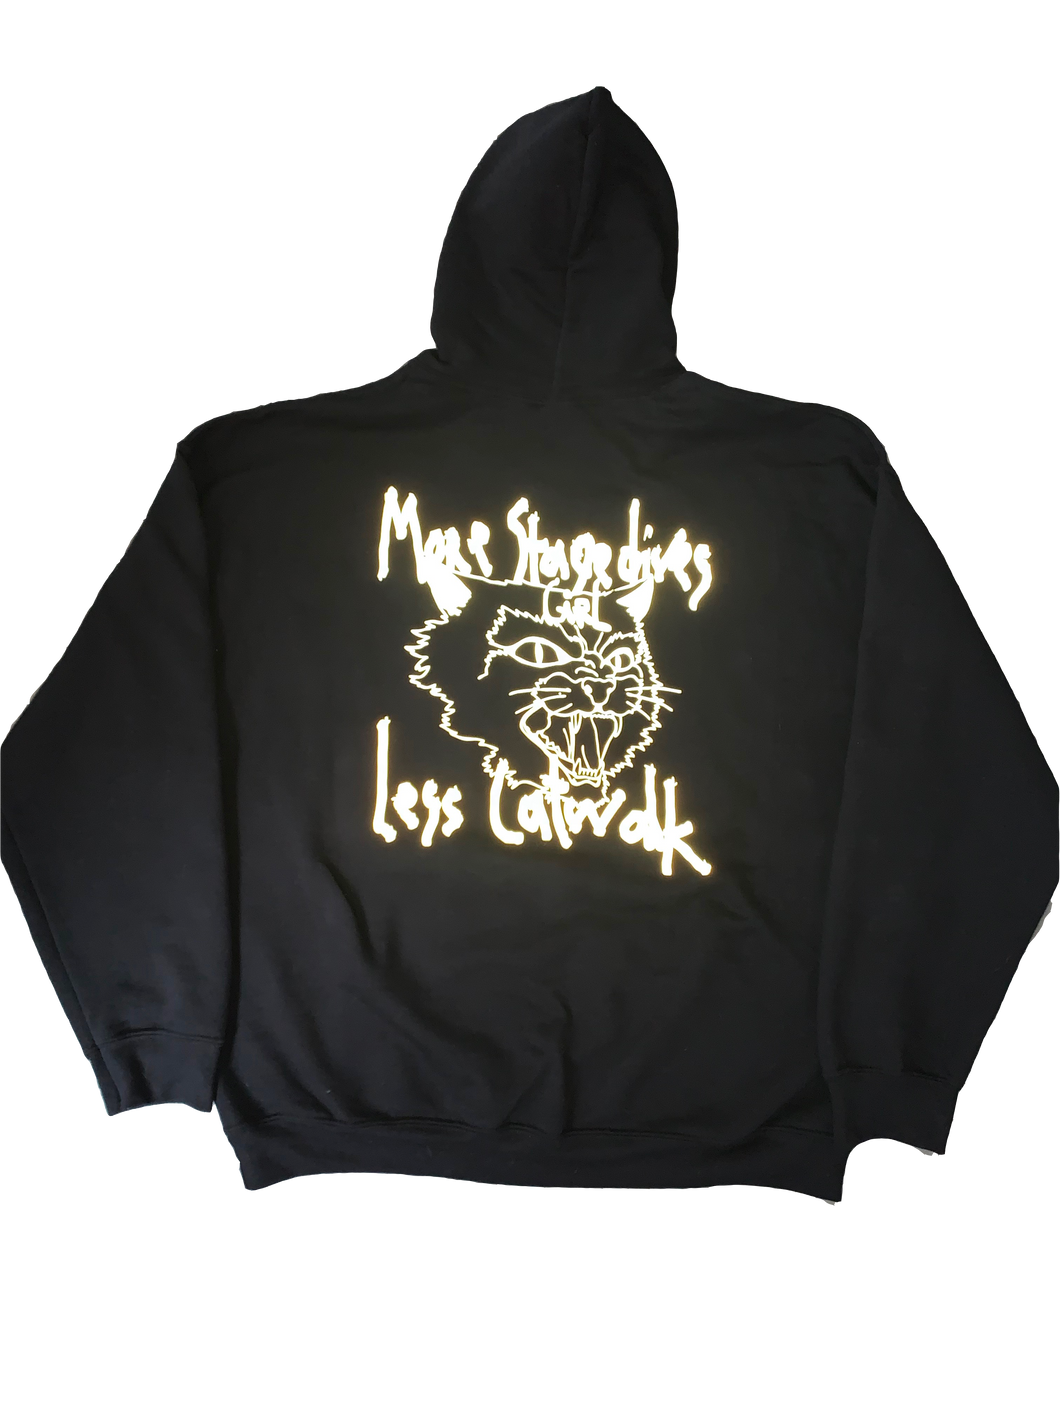 Girl Hoodie More Stagedives Sunset Flash